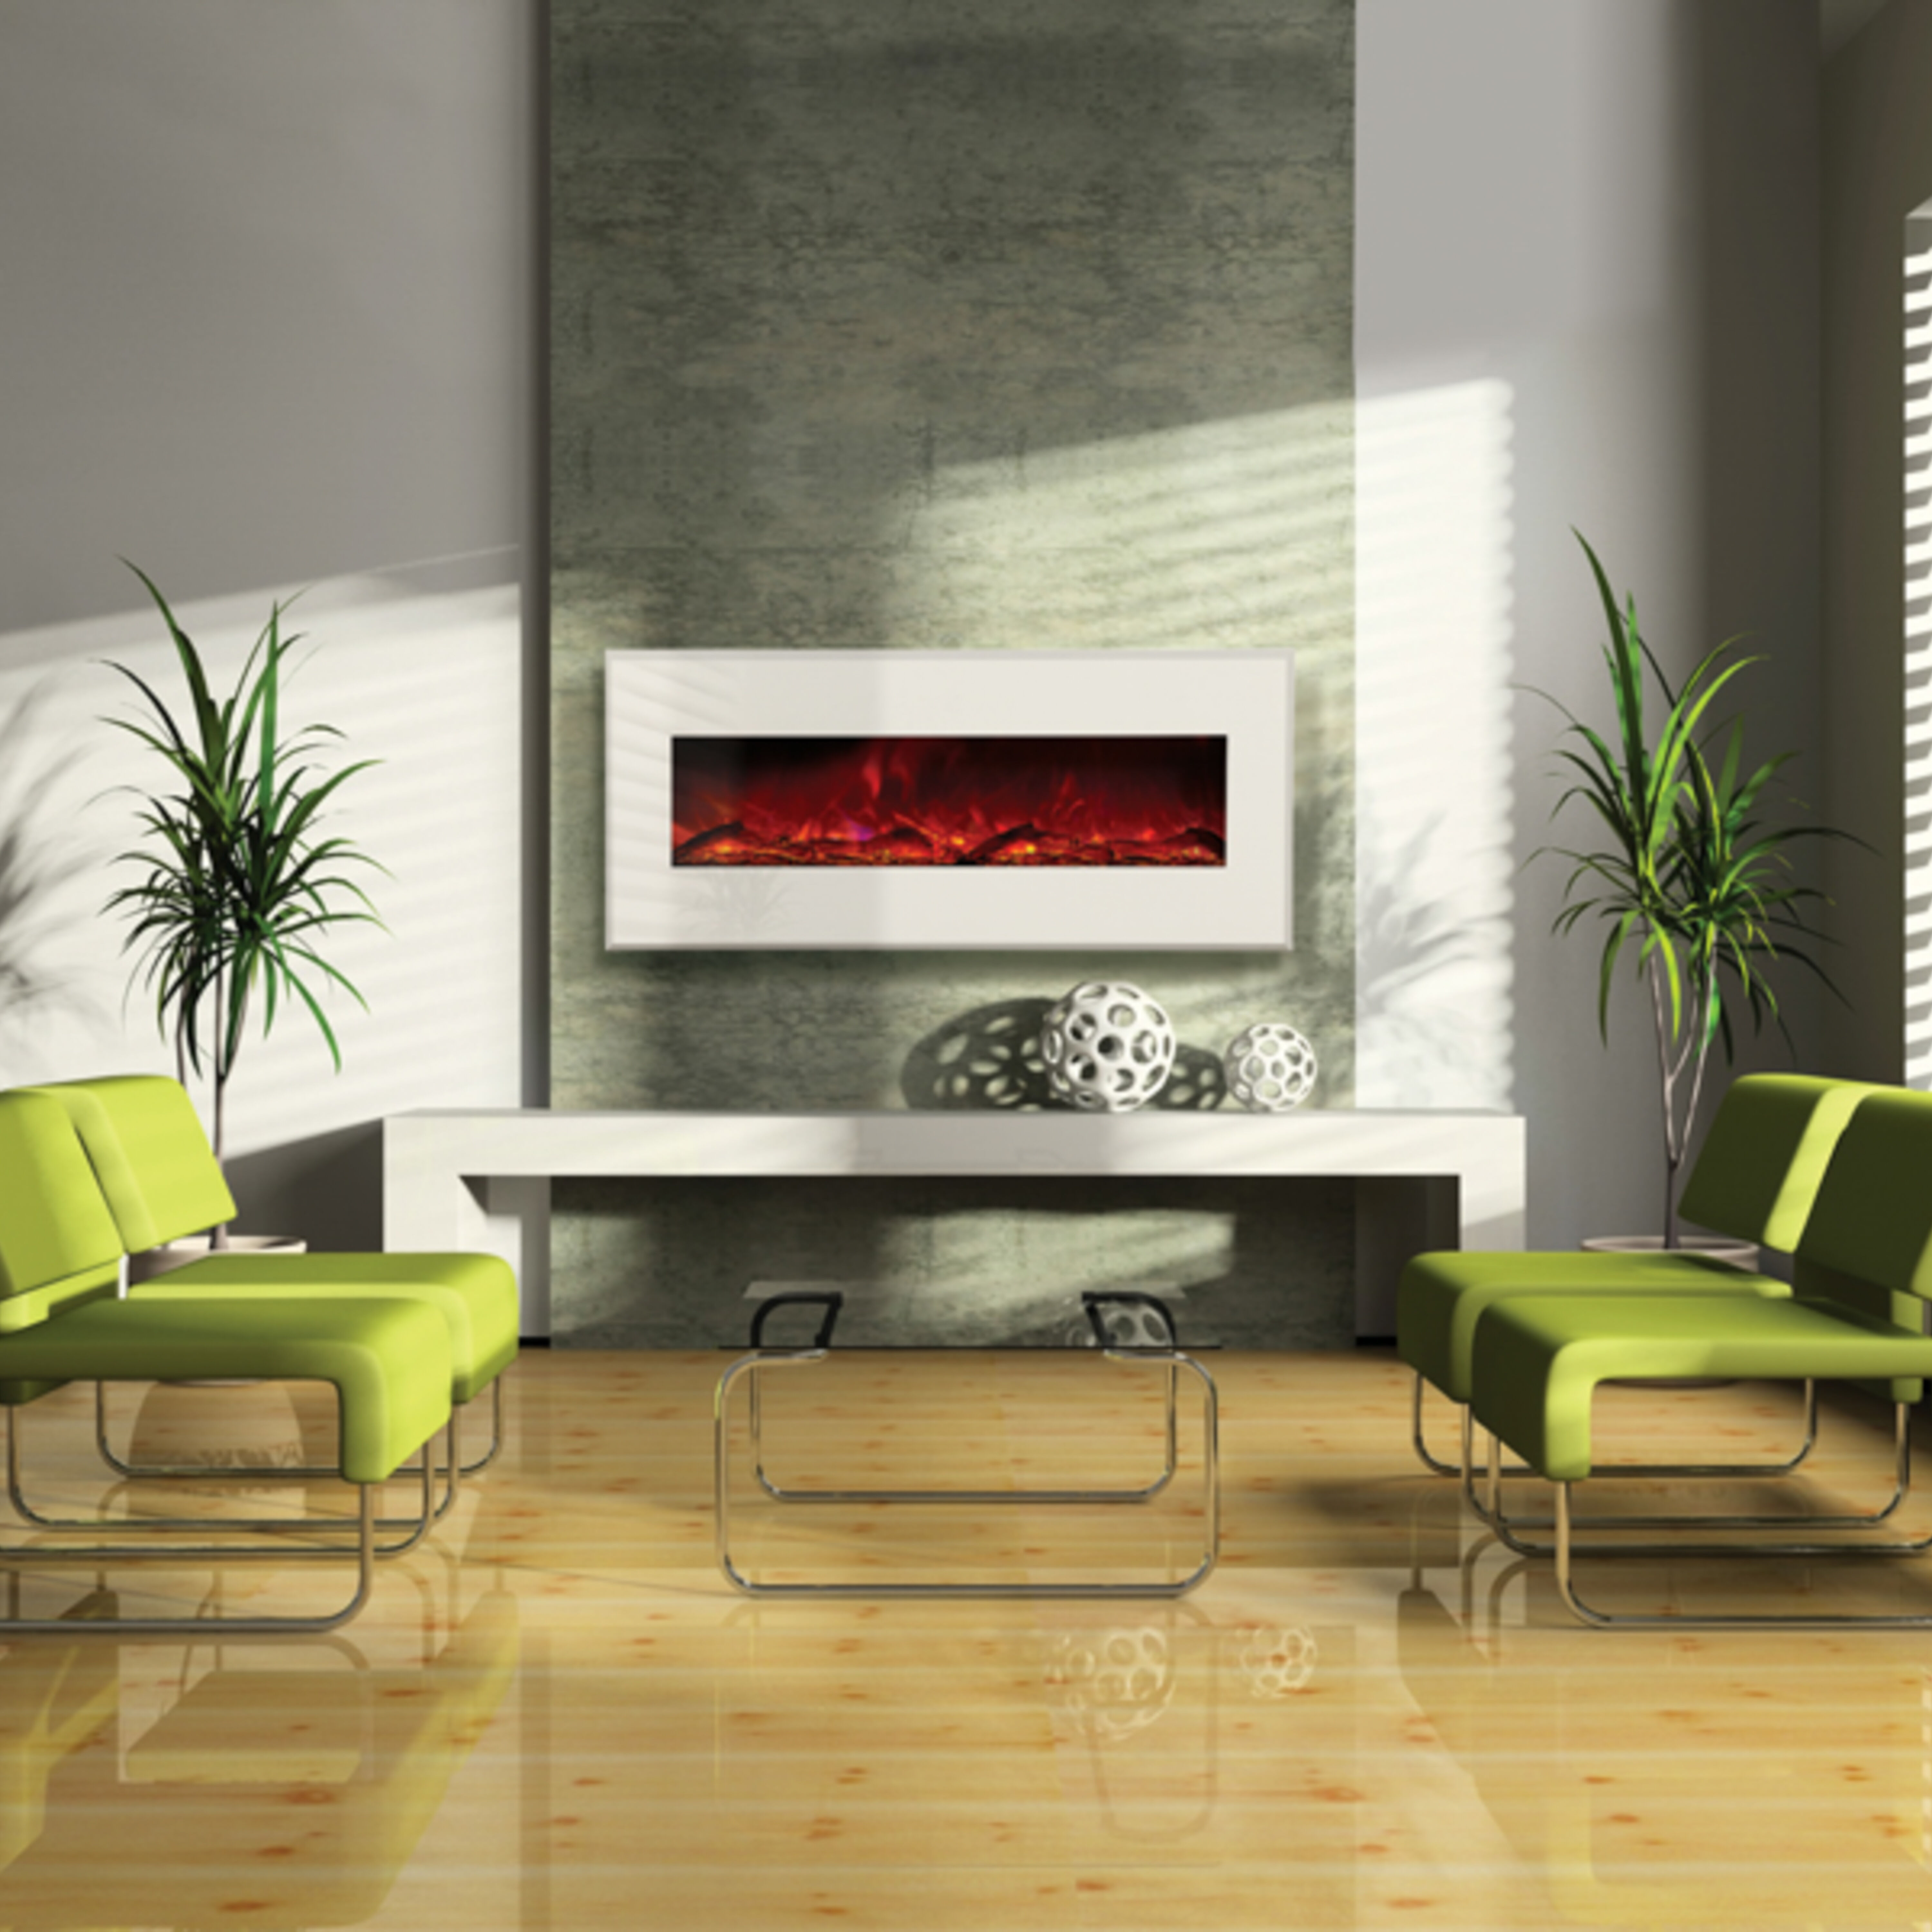 The Amantii Remii Deep Indoor/Outdoor Built-In Electric Fireplace features a unique Fire and Ice flame presentation and a bed of sparkling fire glass media